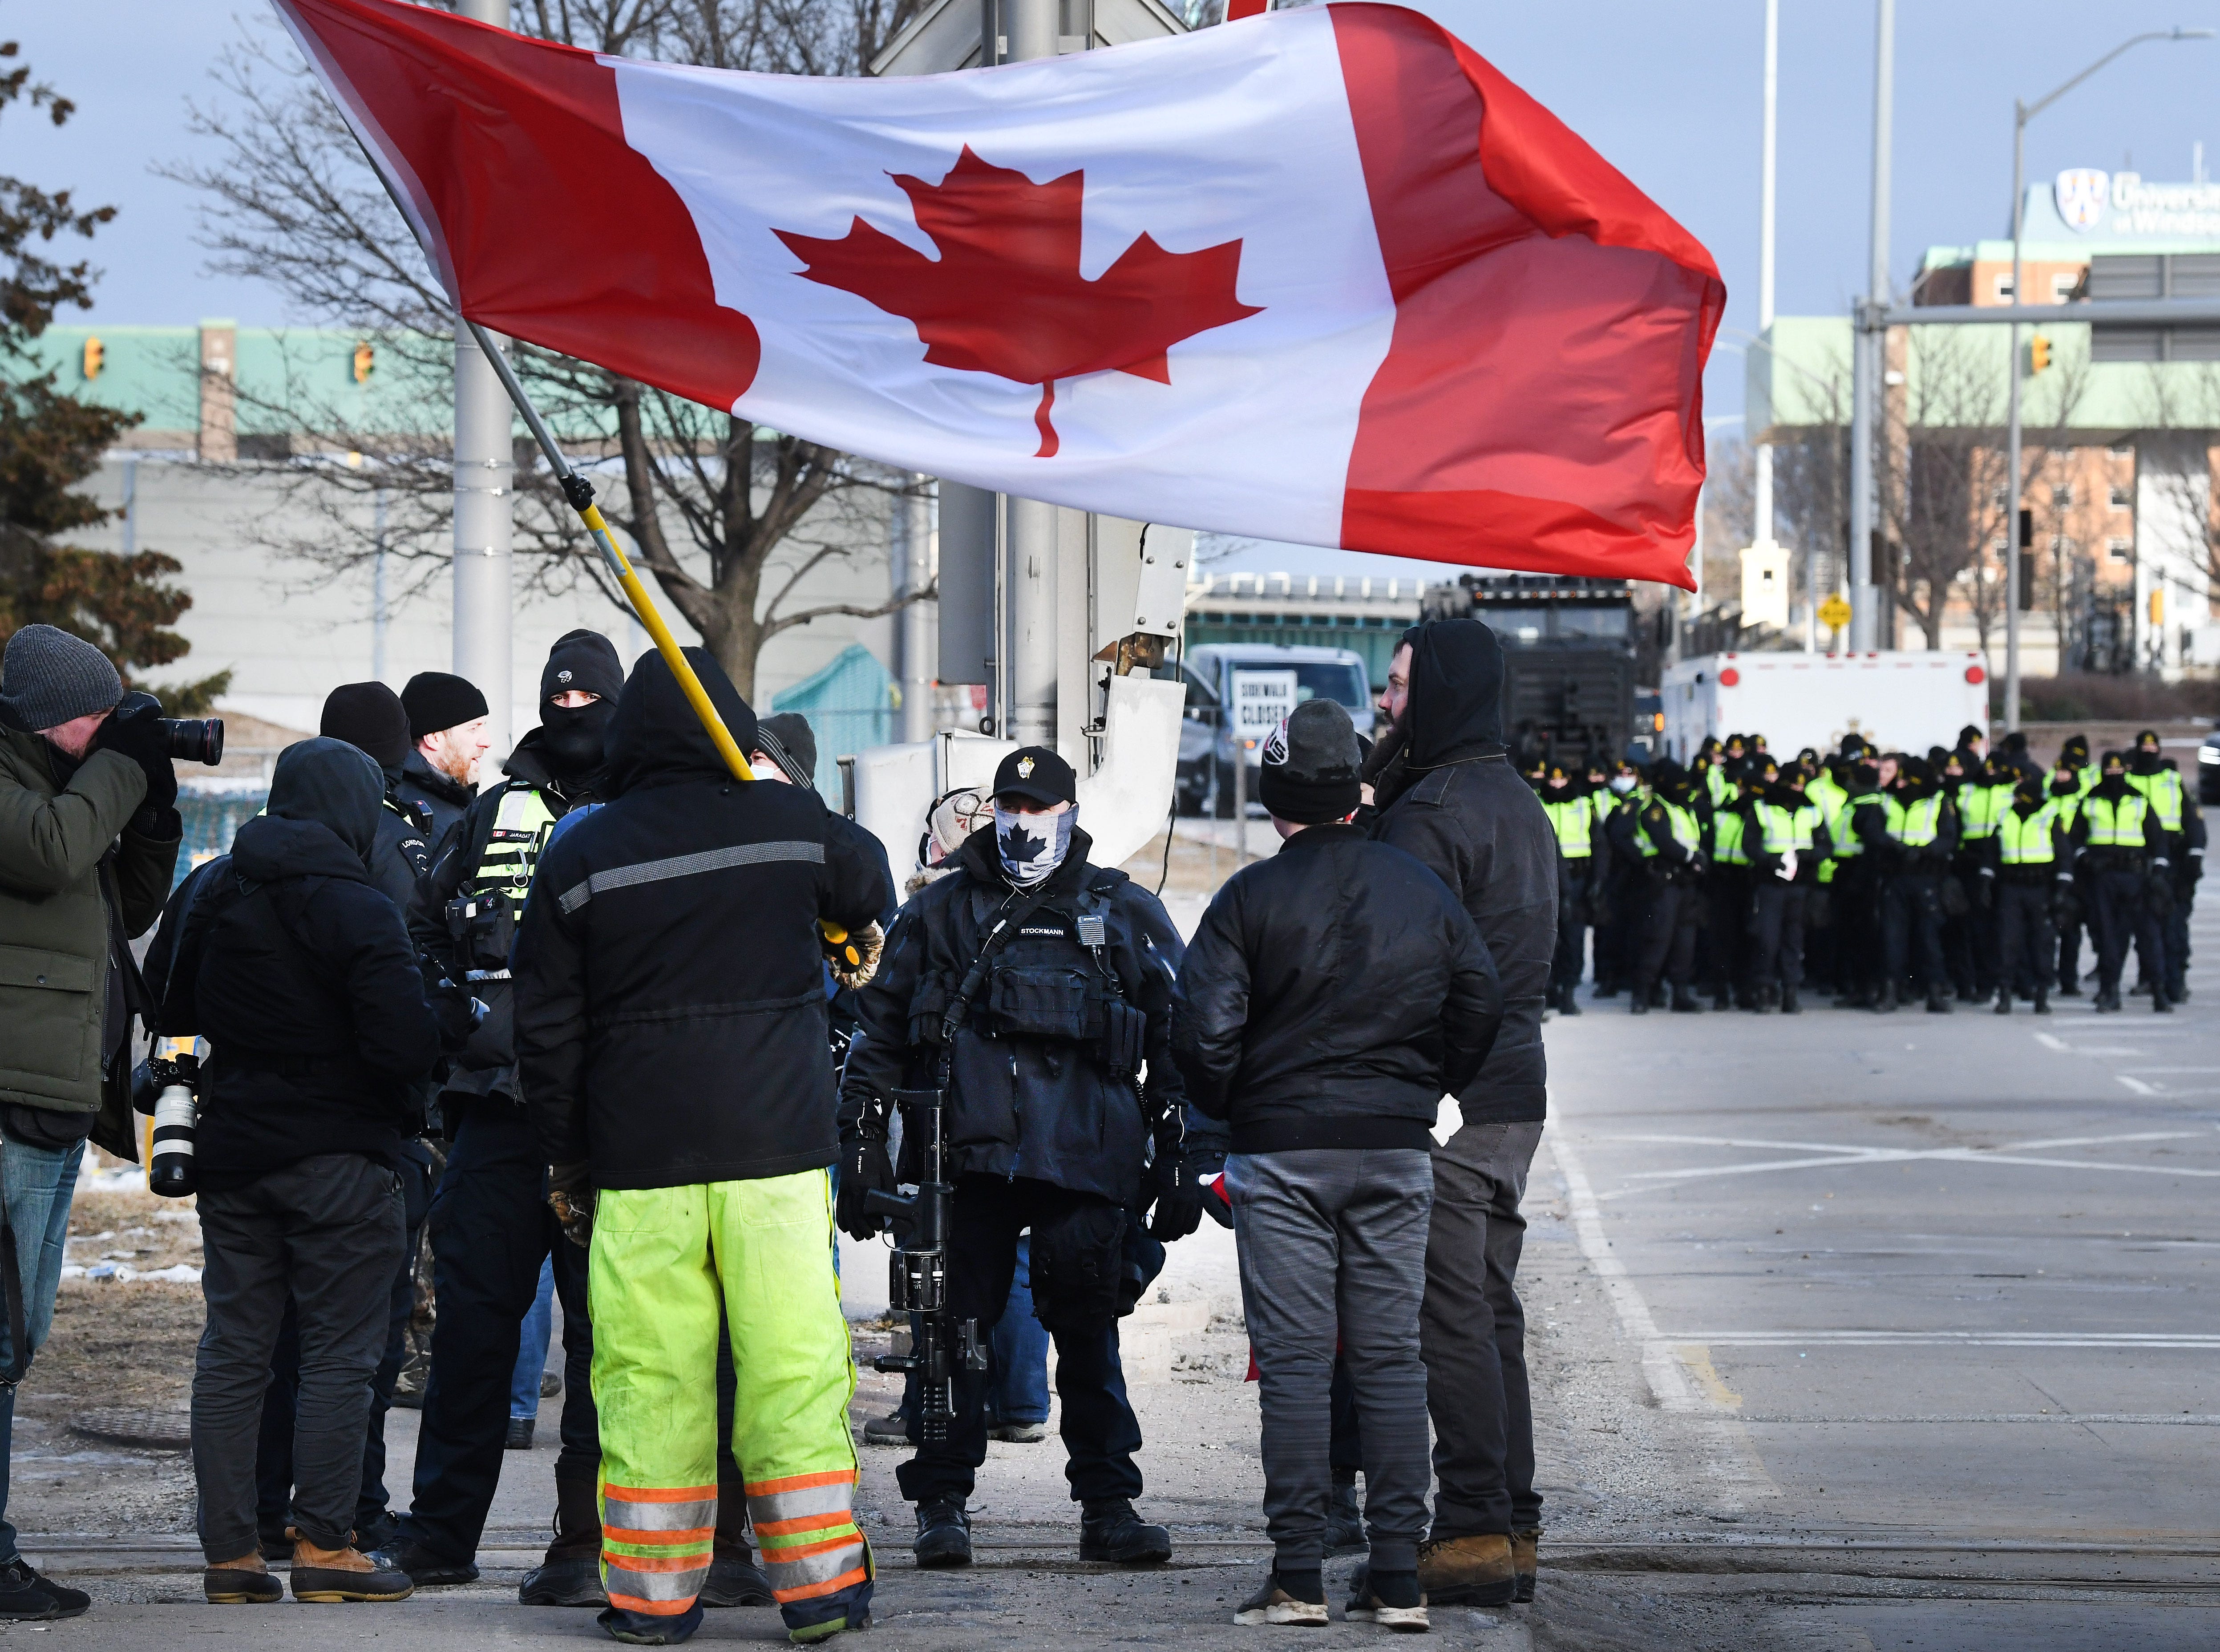 Law enforcement officers move into position to clear a blocked road in Windsor, Canada, on February 12, 2022.